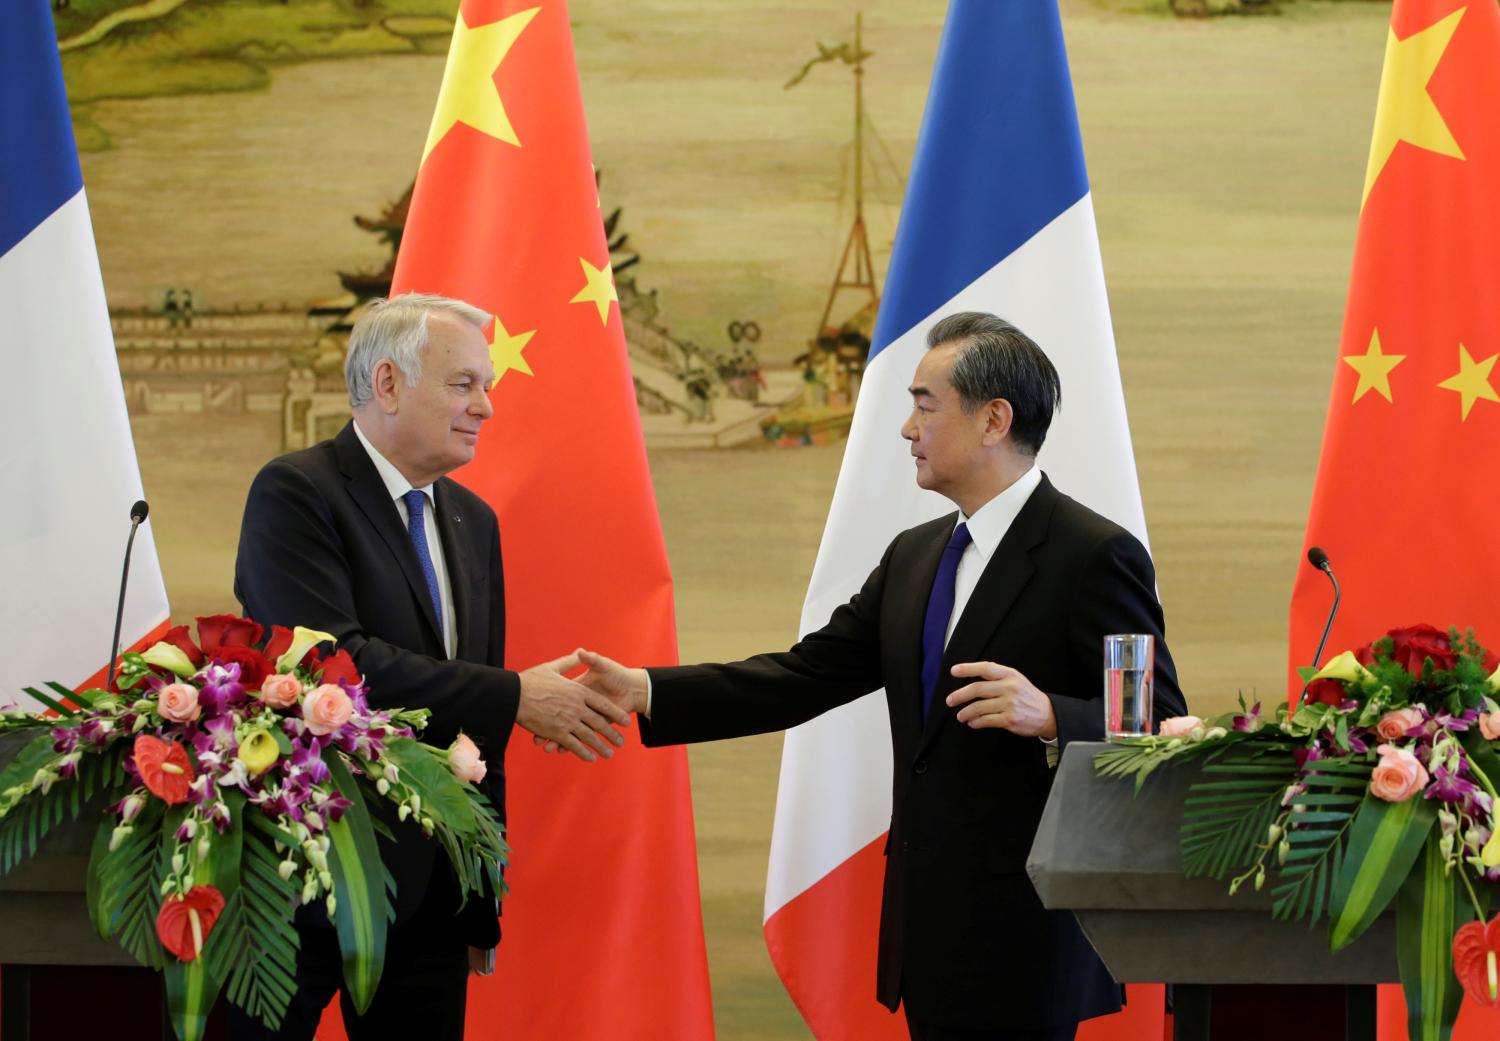 China's Foreign Minister Wang Yi shakes hands with French Foreign Minister Jean-Marc Ayrault in Beijing